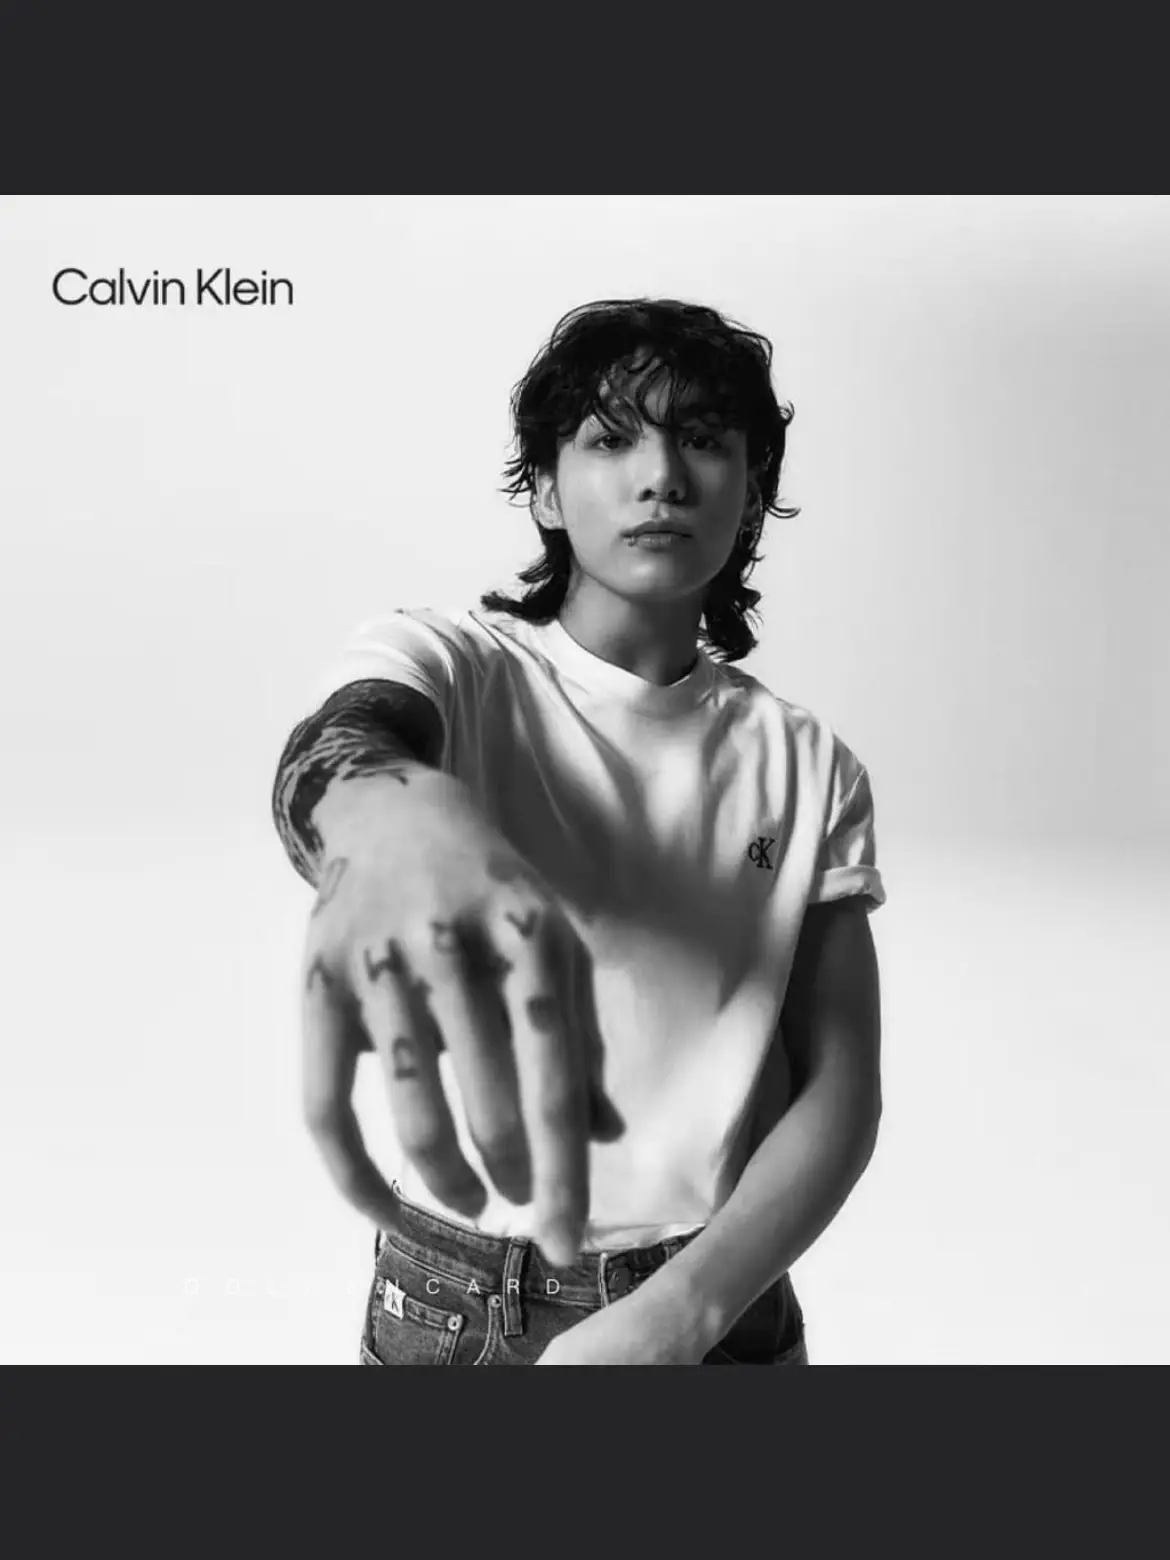 BTS Charts Daily on X: JUNGKOOK'S CALVIN KLEIN AD IS CK'S BIGGEST